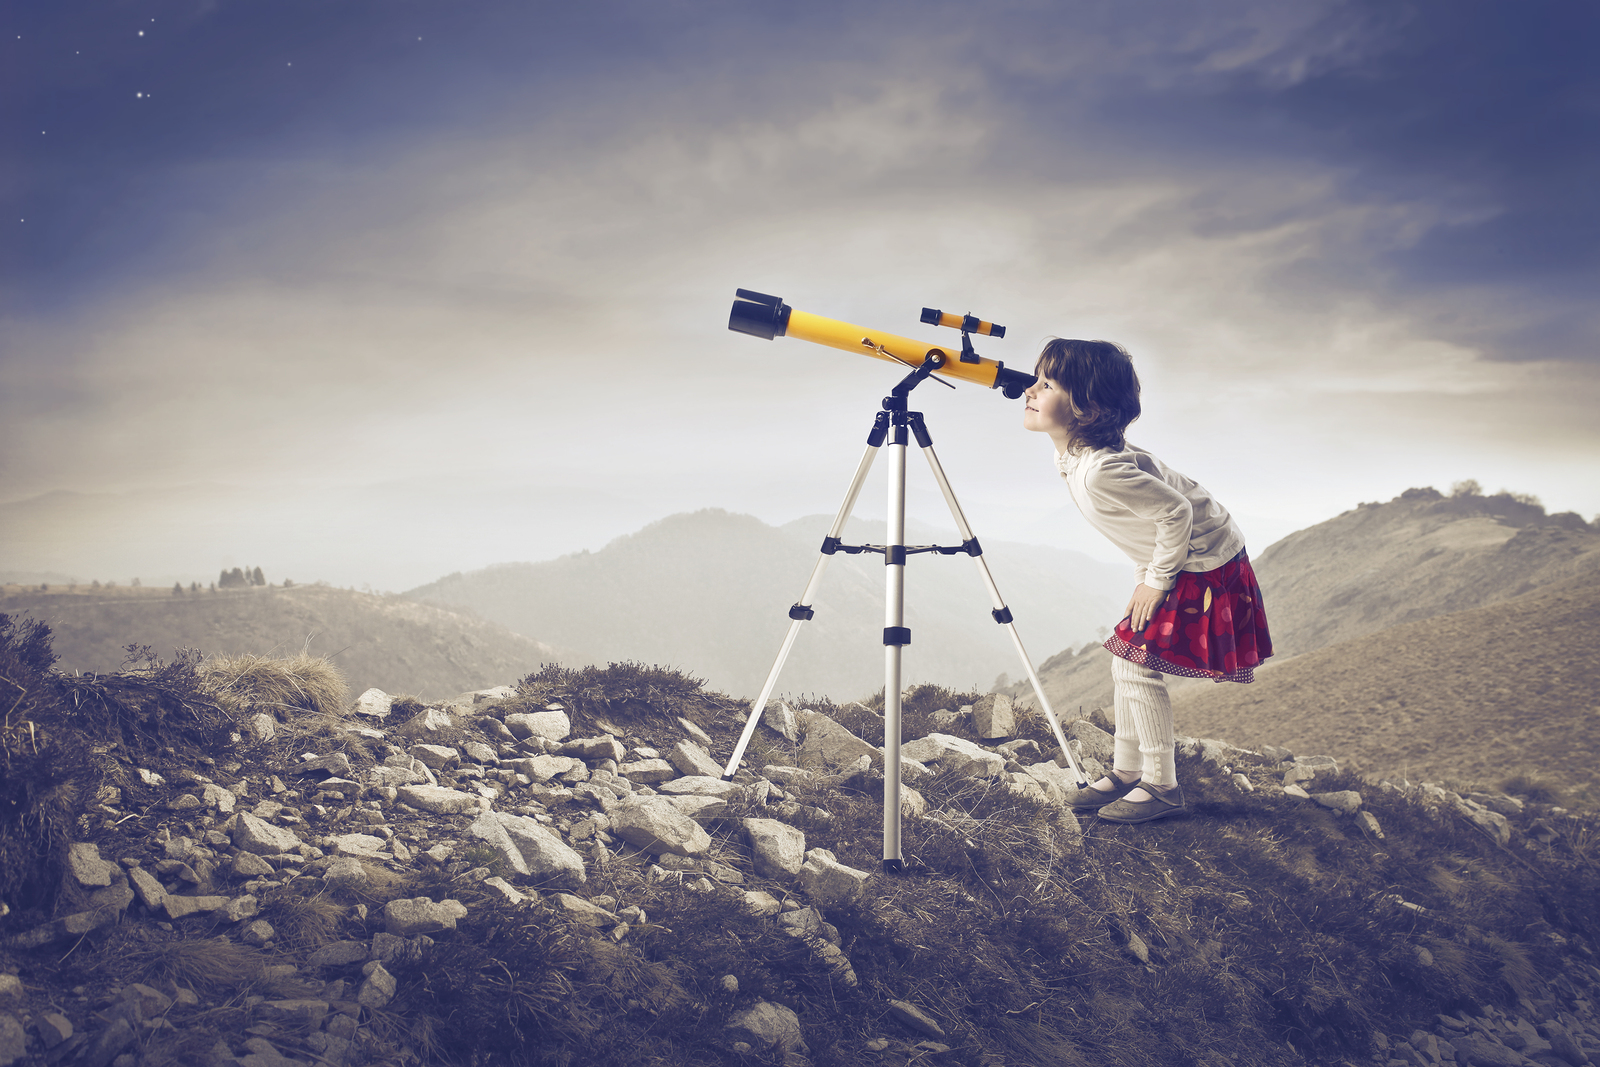 Little girl looking into a telescope in the mountains